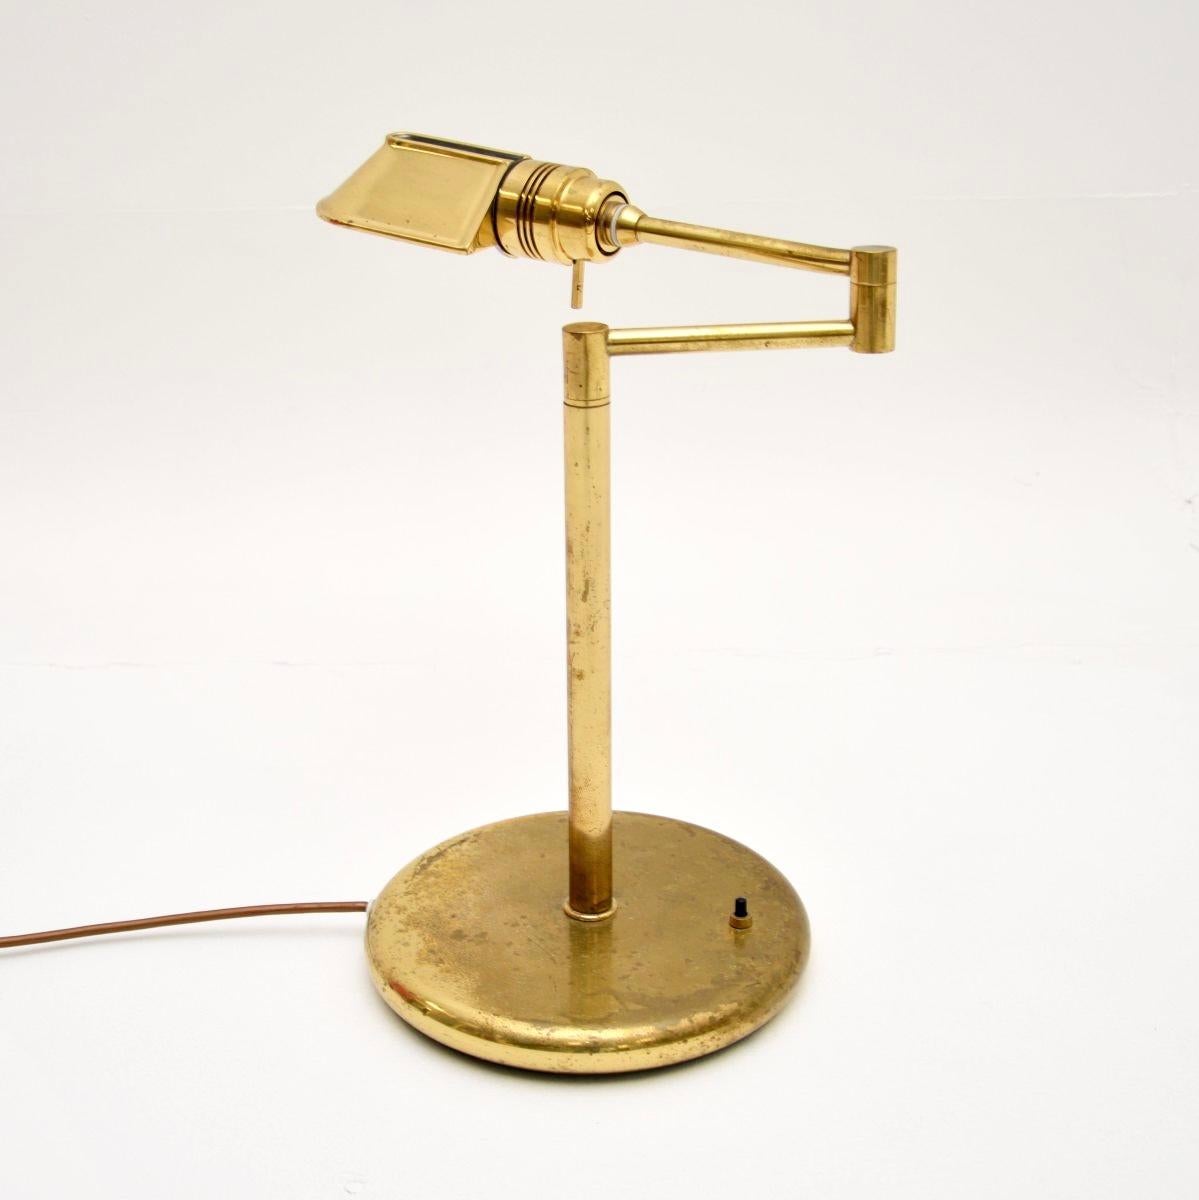 A stylish and very well made vintage brass desk lamp, made in England and dating from the 1970’s.

It is of superb quality and is very heavy for its size. It is solid brass, it sits on a circular base and has an articulated shaft, so the shade can